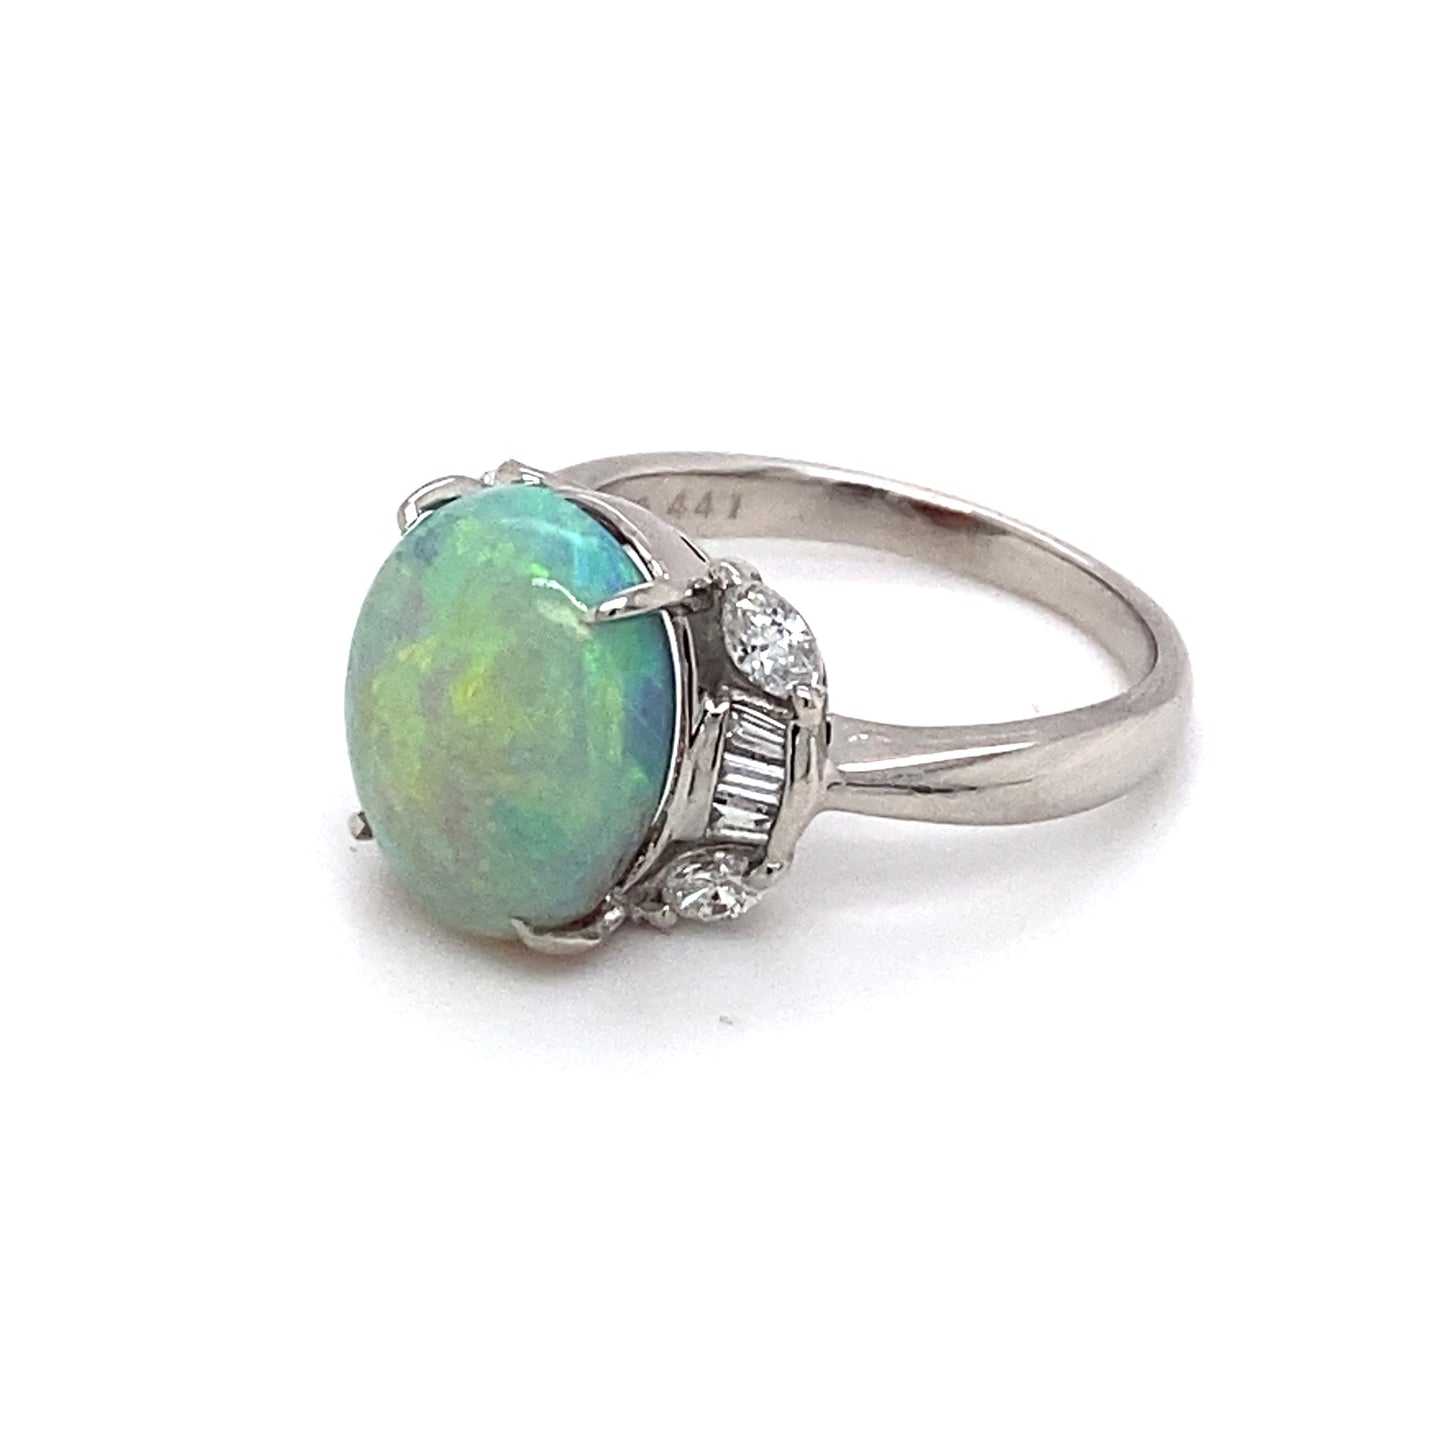 Circa 1950 4.41ct Opal and Diamond Ring in Platinum